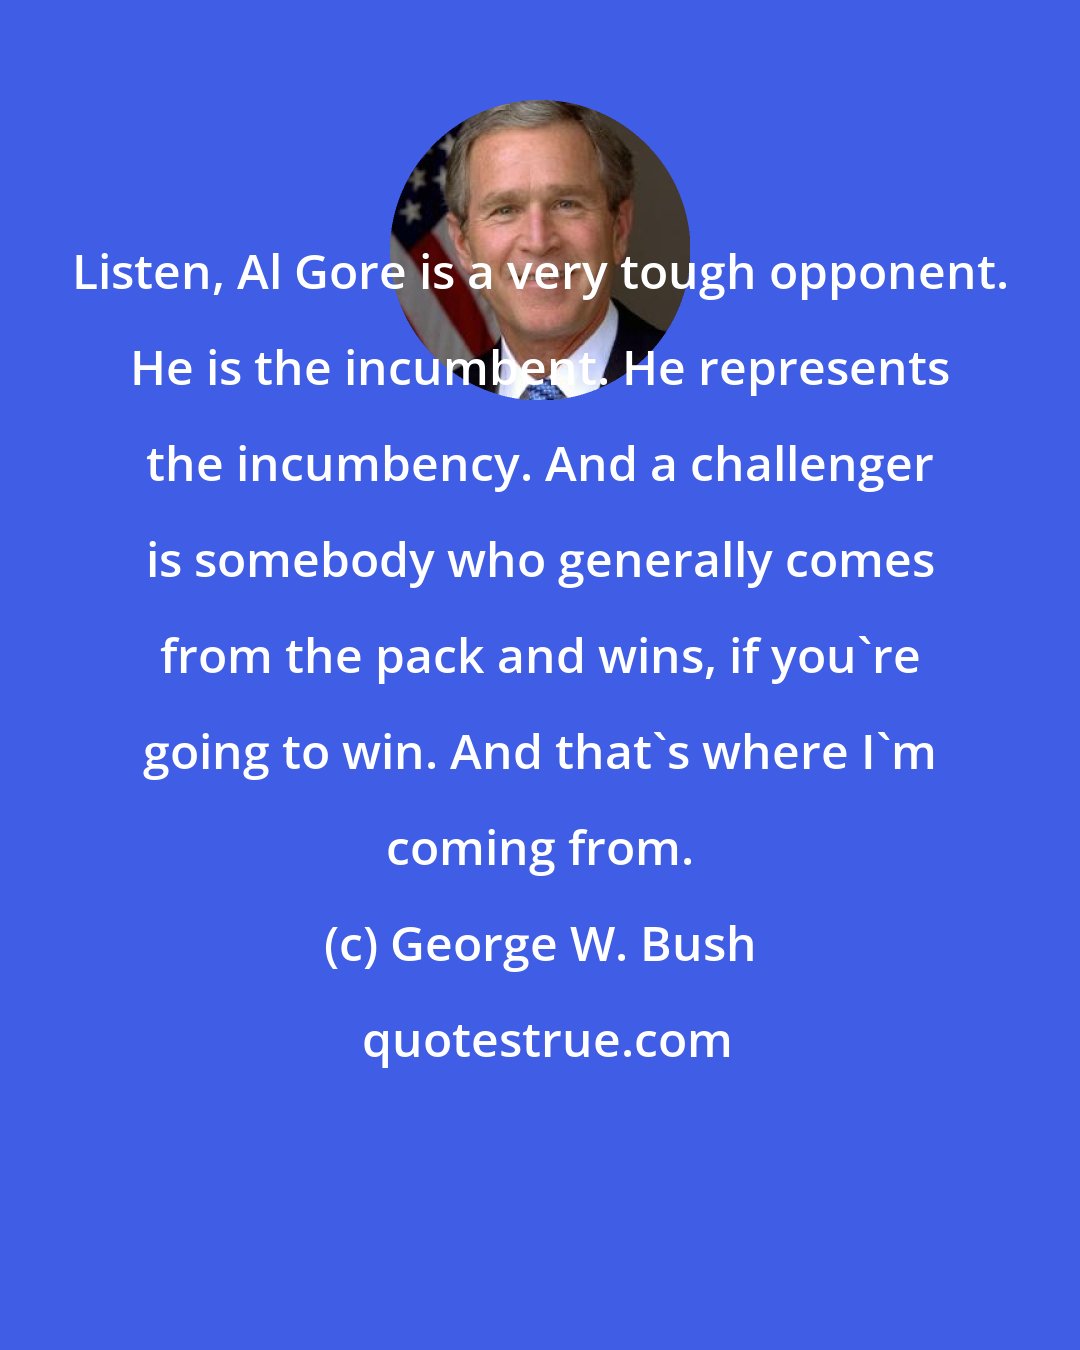 George W. Bush: Listen, Al Gore is a very tough opponent. He is the incumbent. He represents the incumbency. And a challenger is somebody who generally comes from the pack and wins, if you're going to win. And that's where I'm coming from.